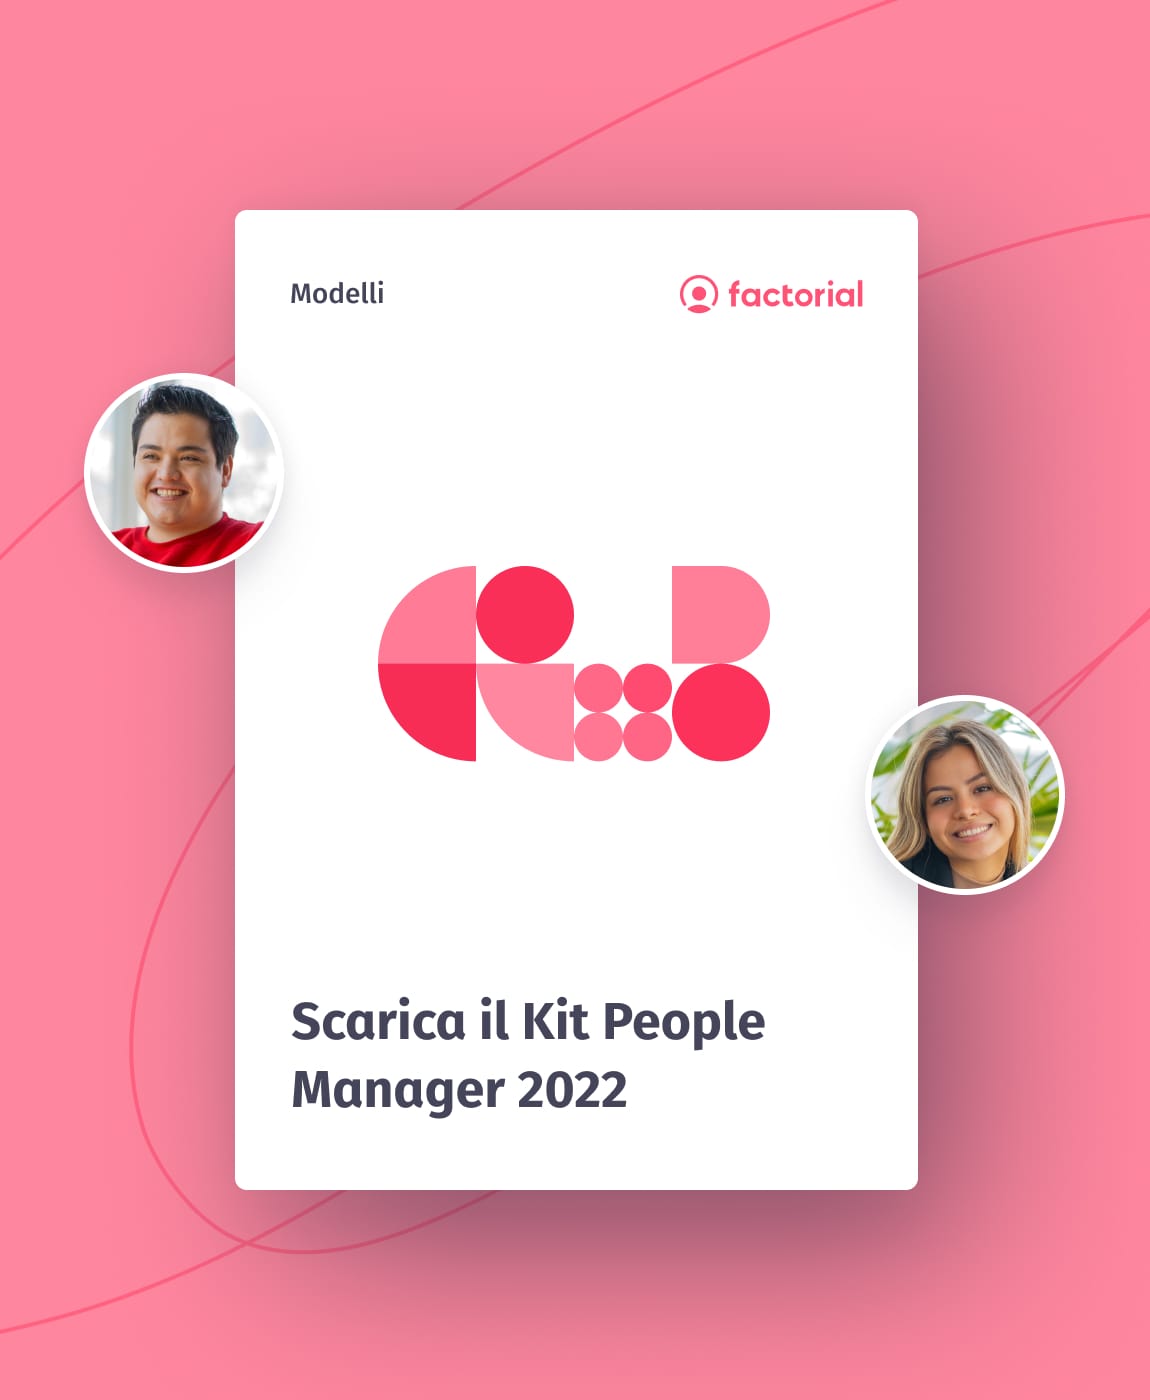 Scarica il Kit People Manager 2022